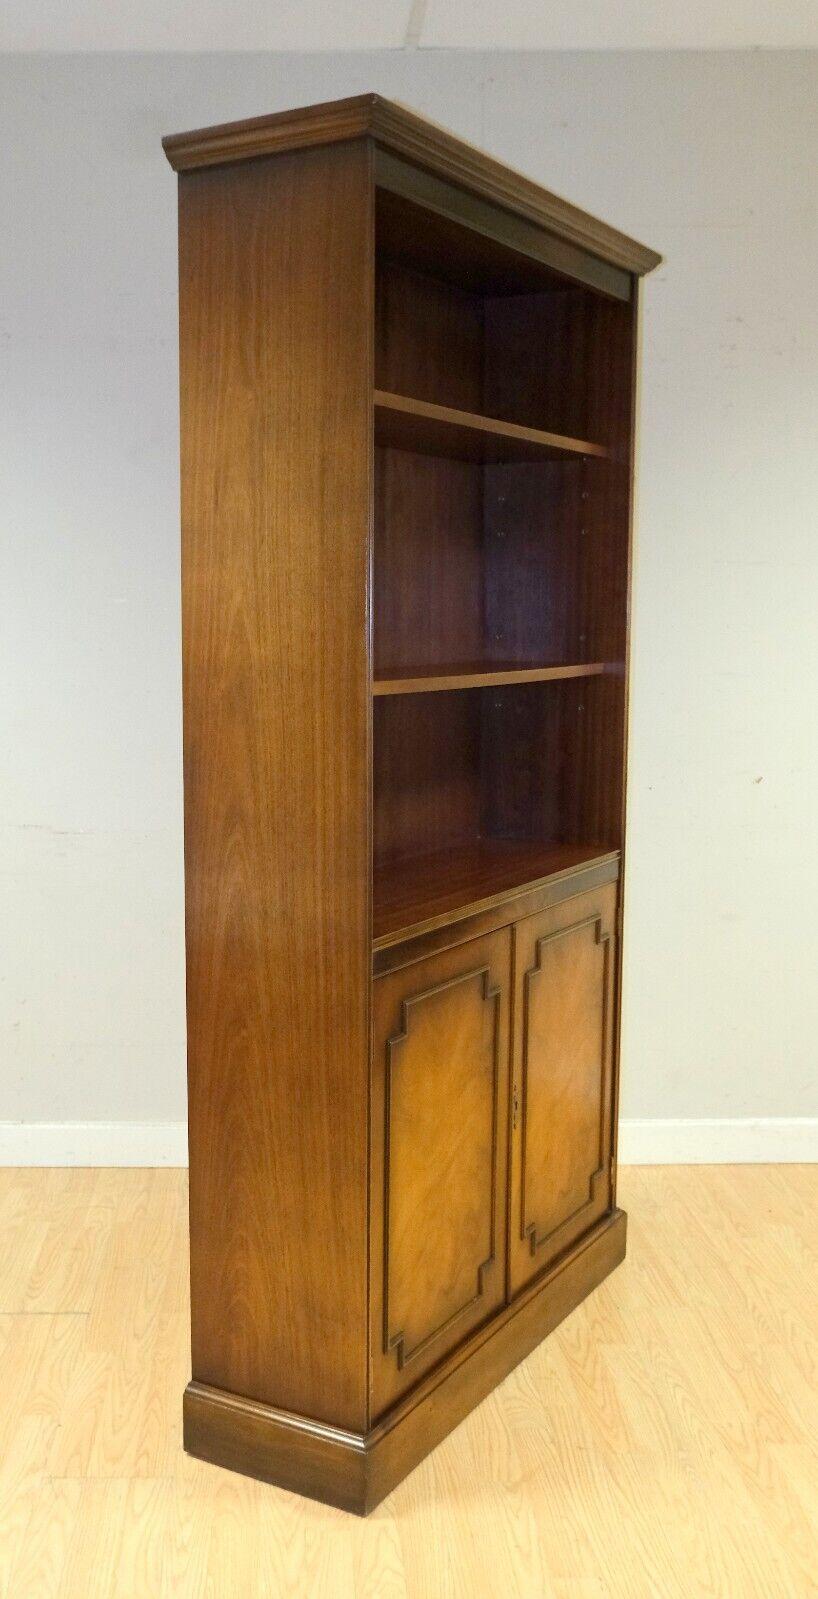 English BRADLEY FURNITURE ENGLAND YEW WOOD OPEN LiBRARY BOOKCASE CUPBOARD BASE For Sale